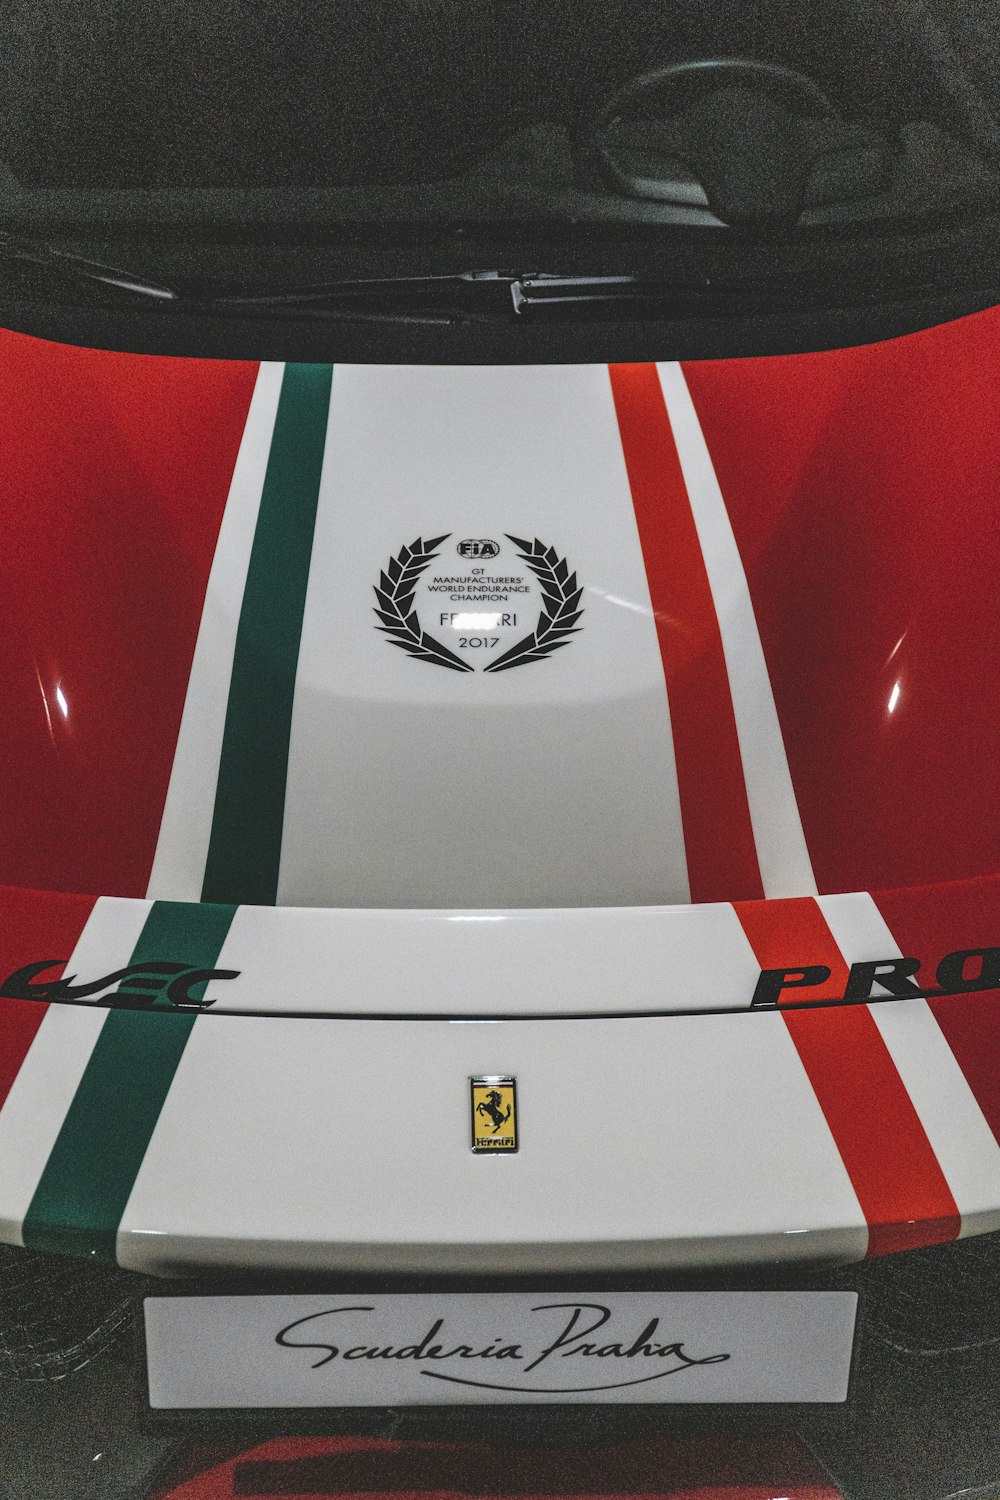 a red, white and green sports car with a logo on it